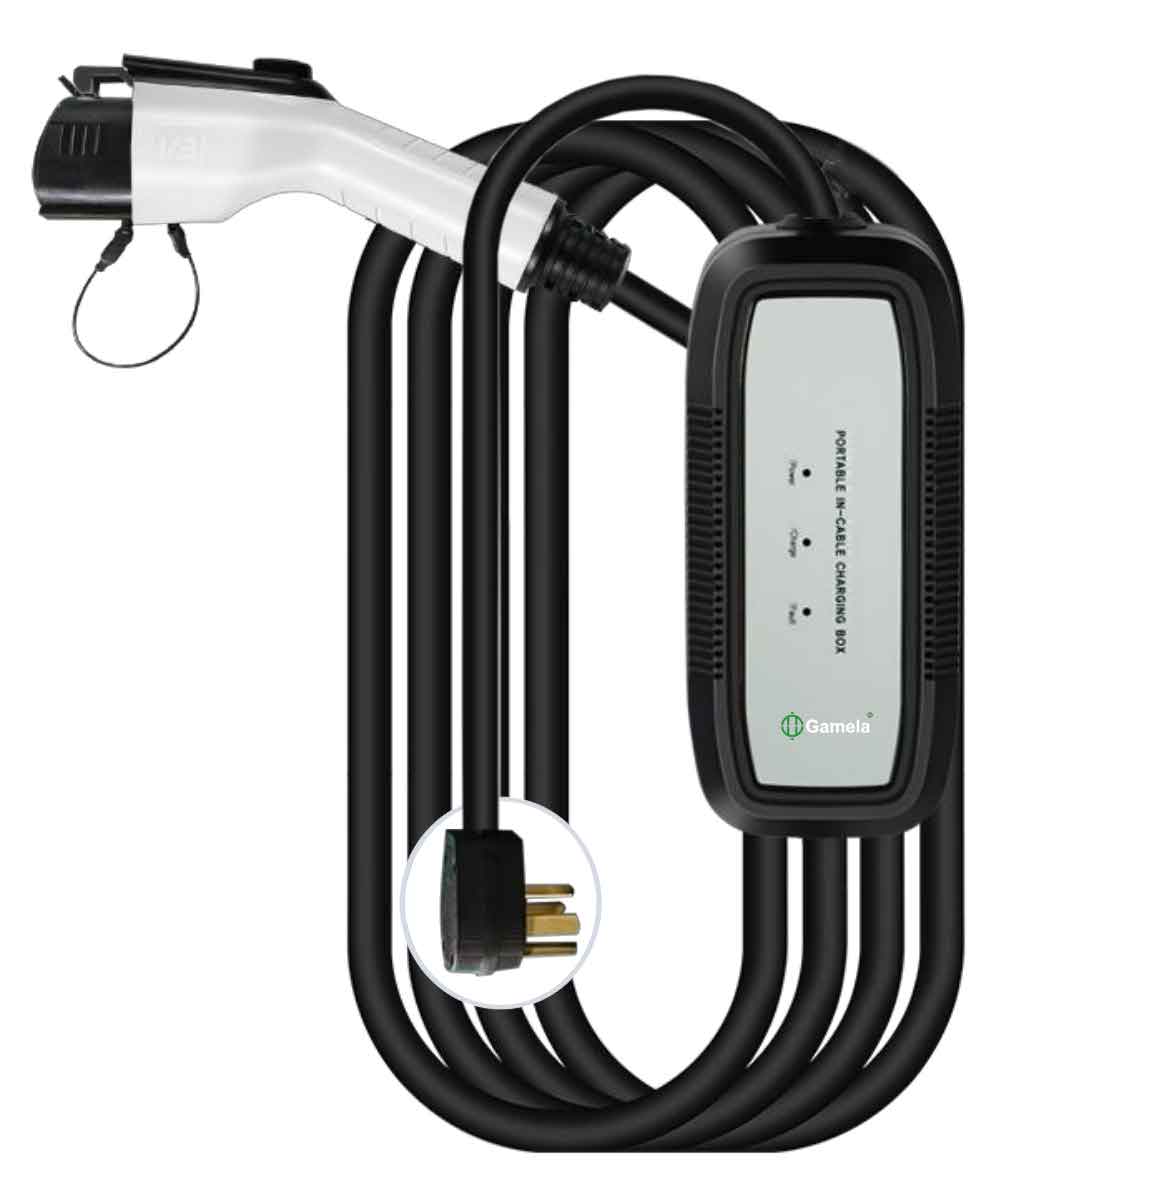 1431EAMG - Type1-J1772-32A-AC-Indicator-Light-Portable-Ev-Charger-with-power-plug-14-50P-output-current-32A